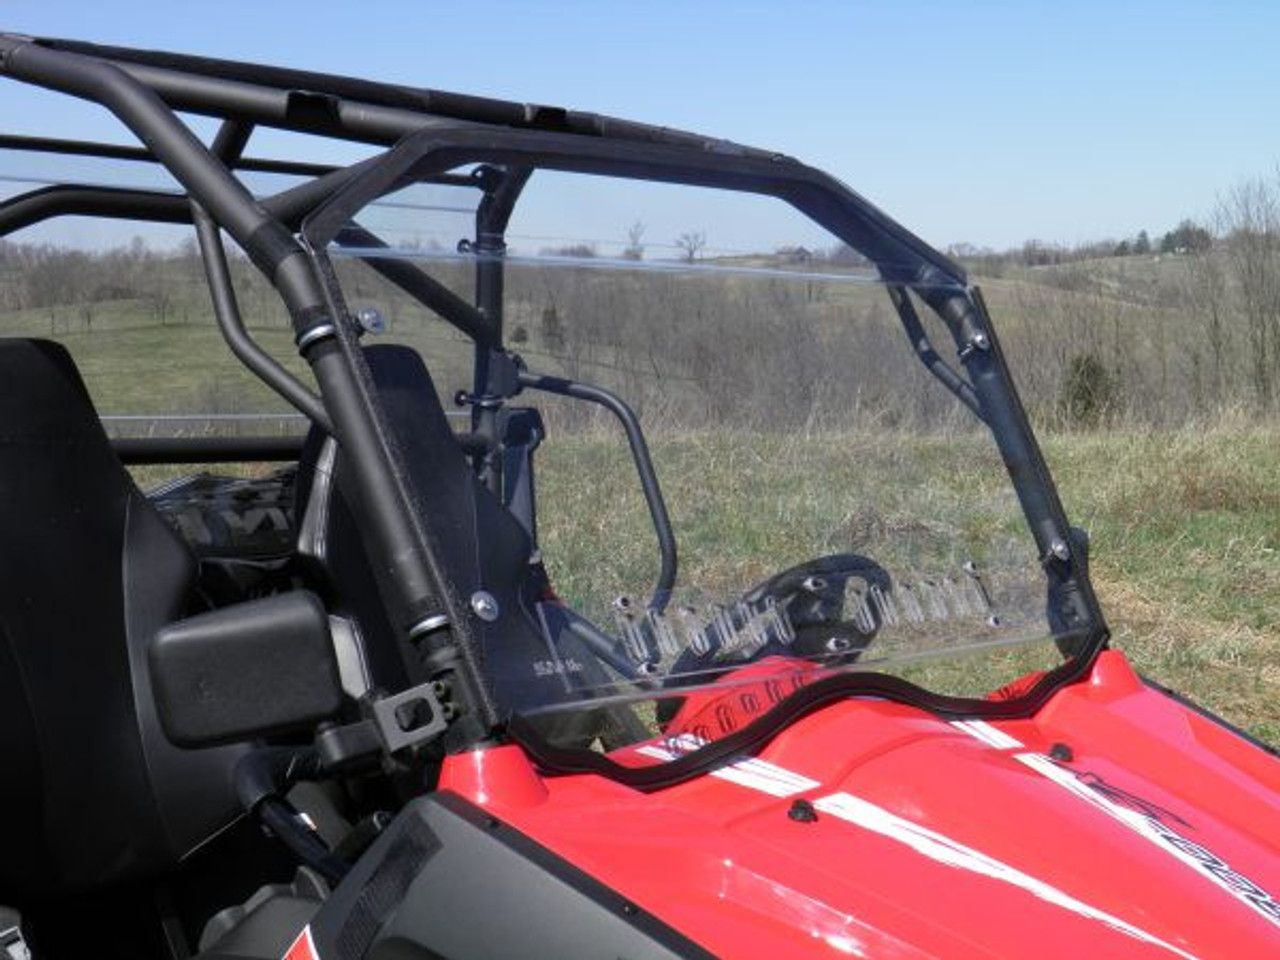 33 Star side x side Z-Force 500 800 800ex 1000 windshield front angle view